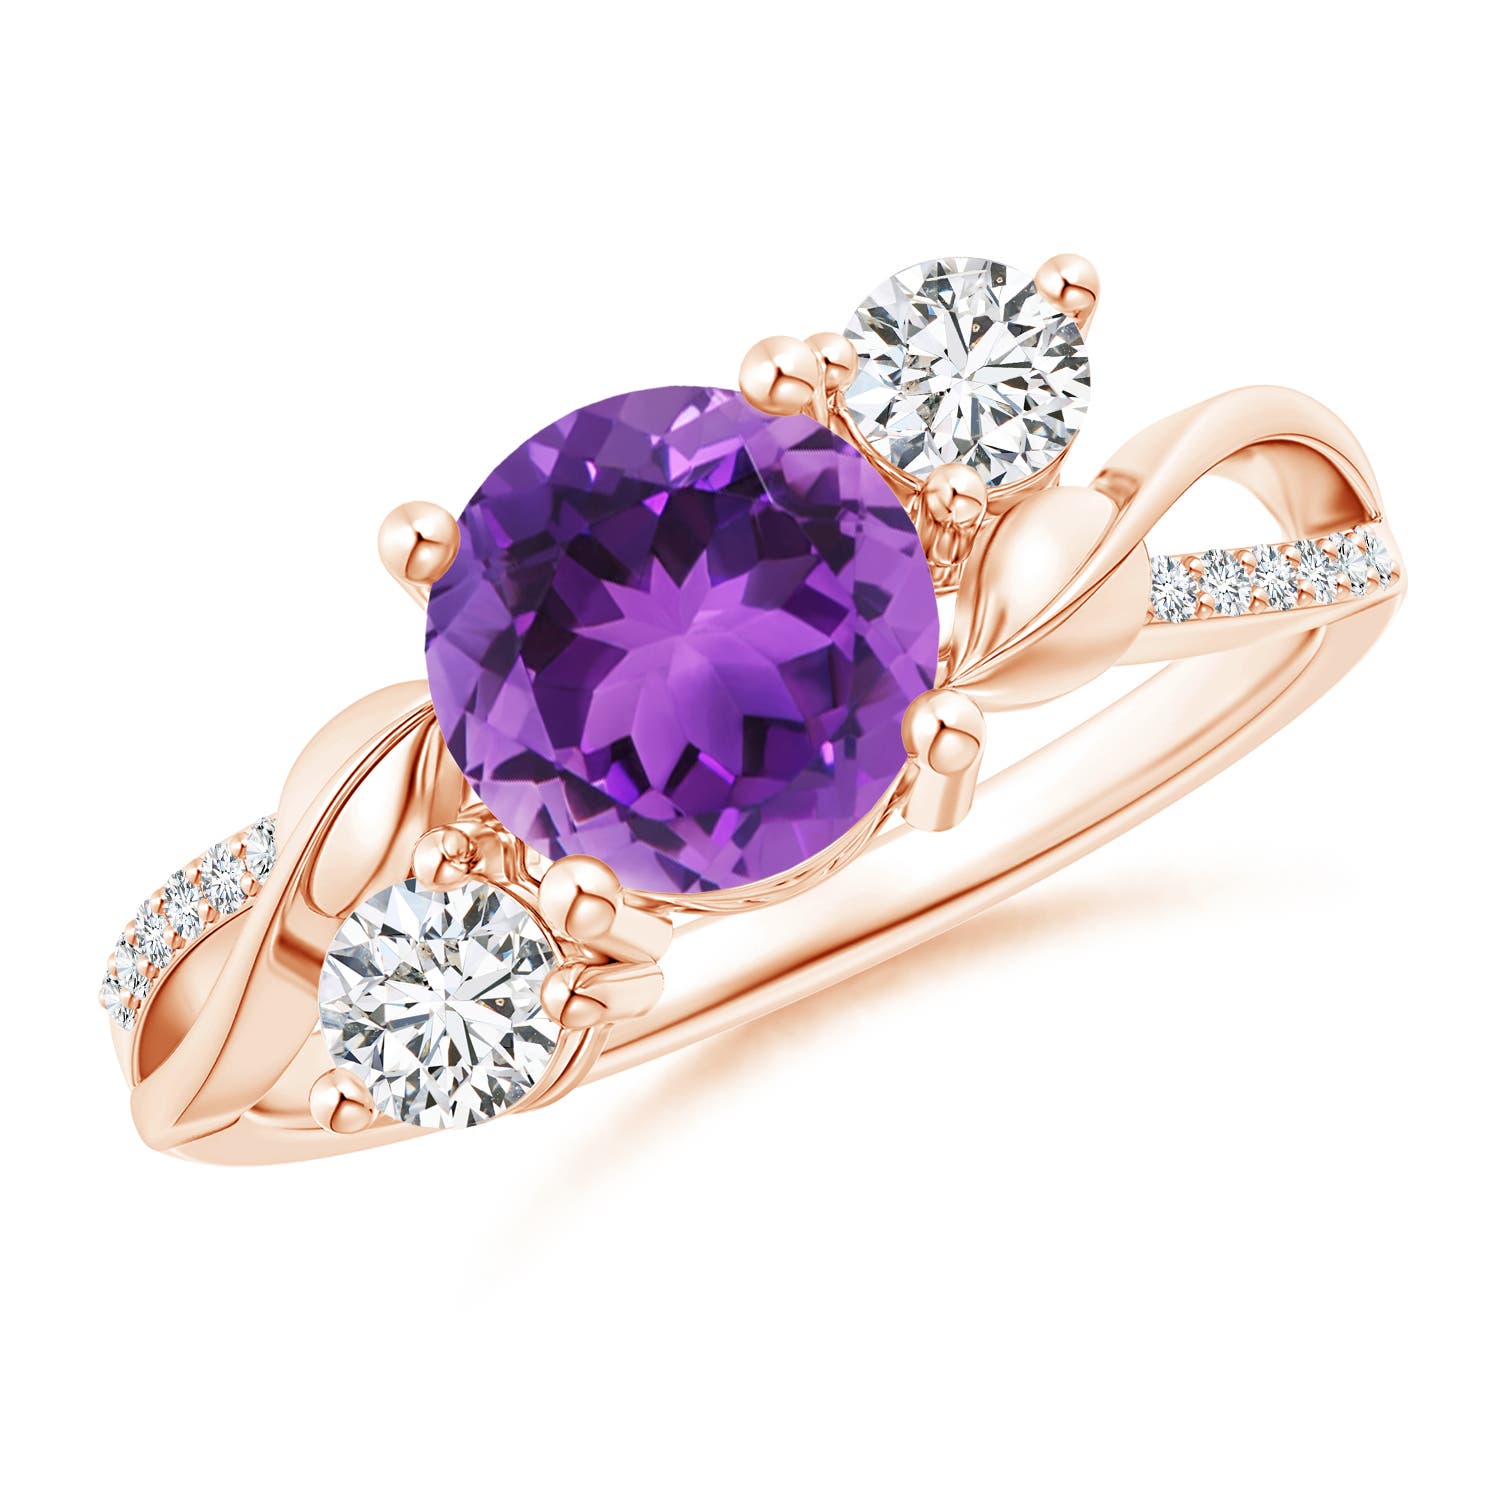 AAA - Amethyst / 1.53 CT / 14 KT Rose Gold